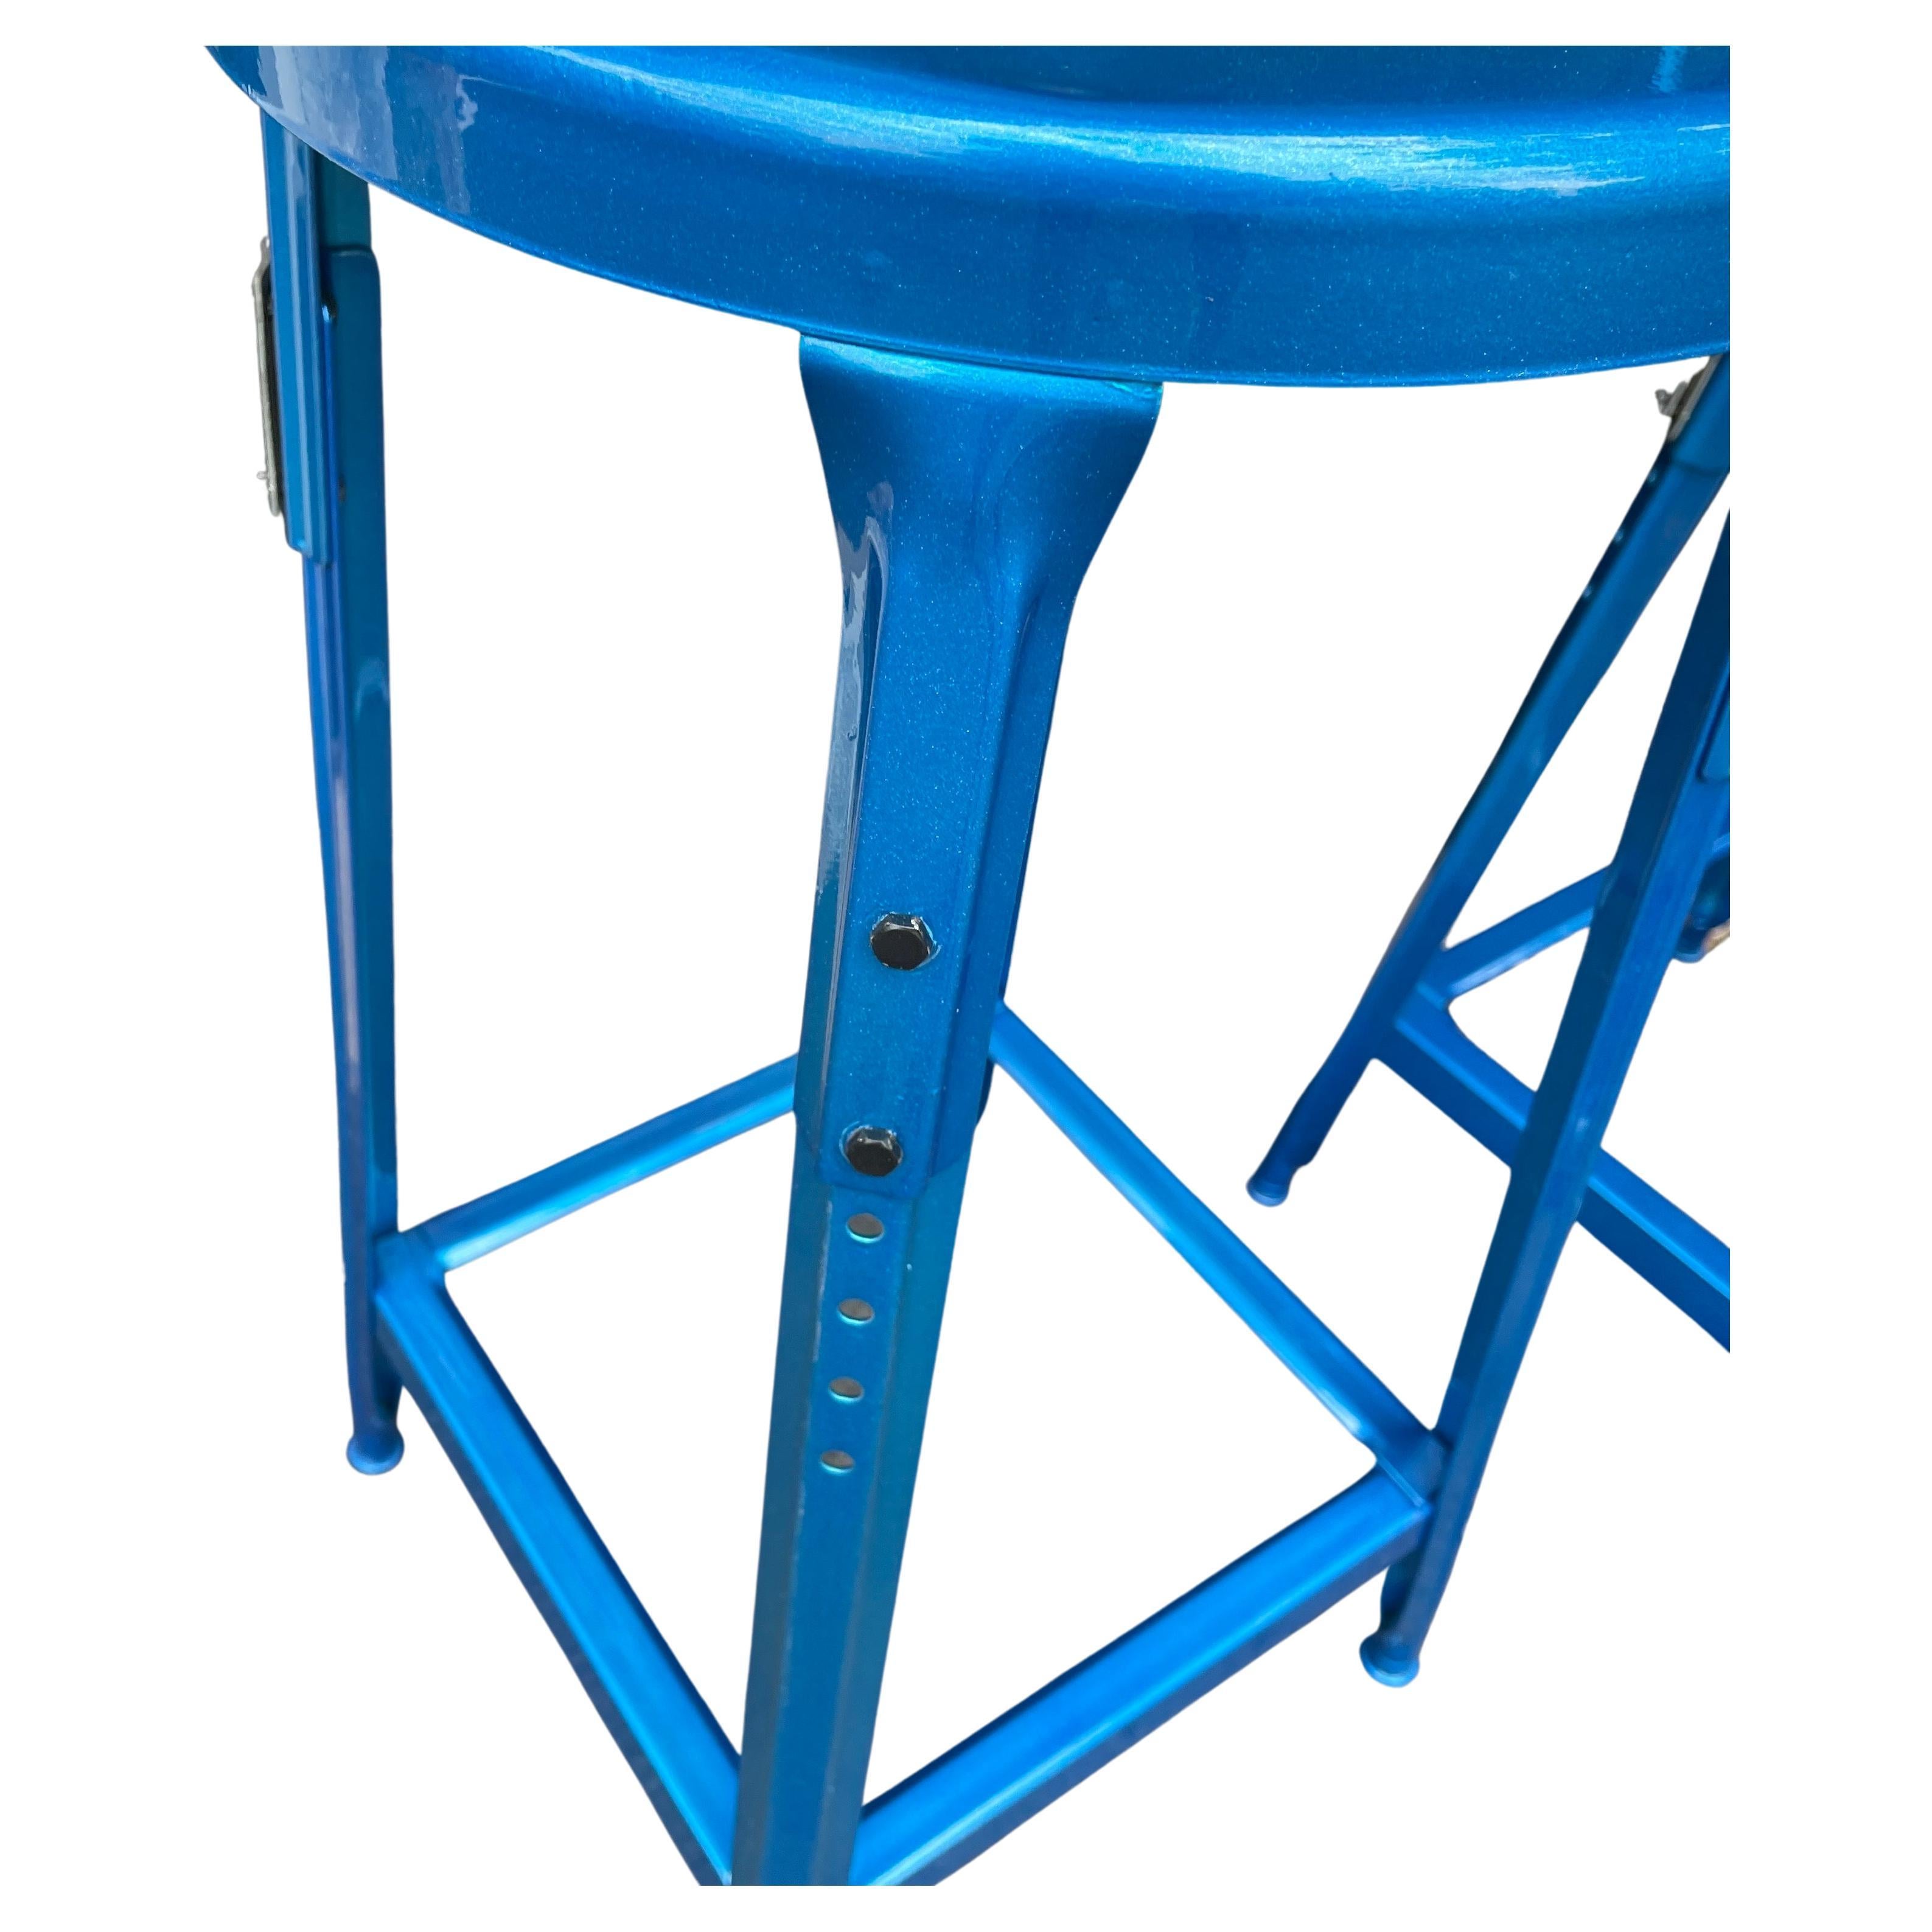 Set of Two Heavy Industrial Bar Stools in Powder Coated Blue For Sale 5